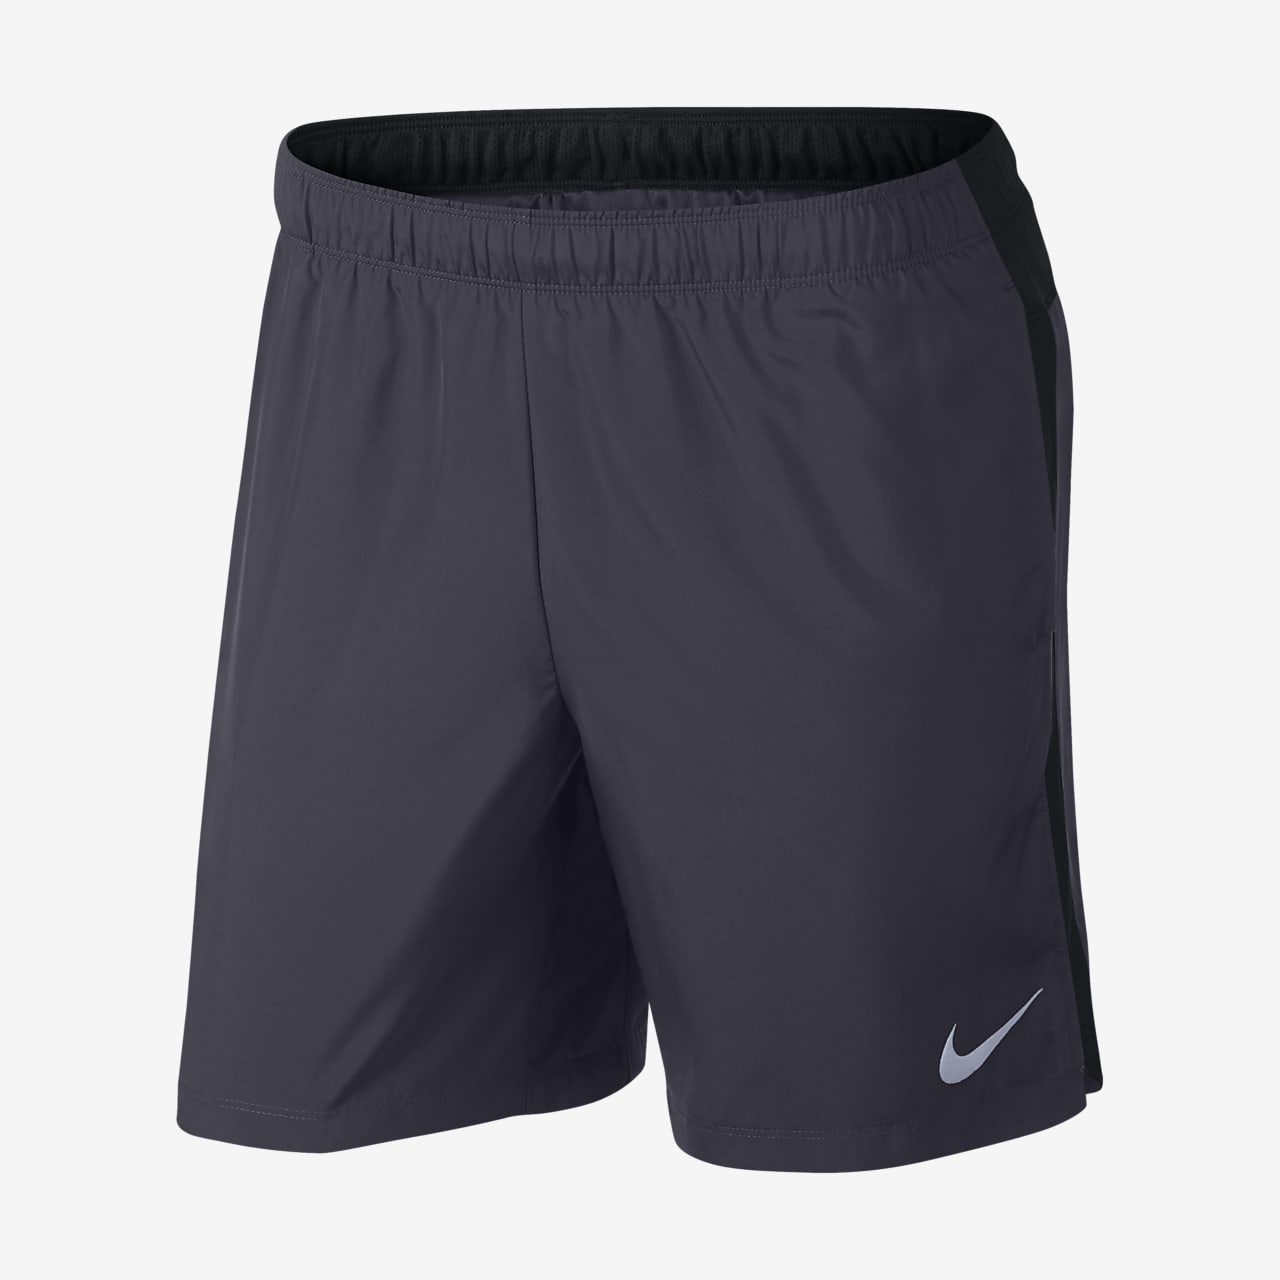 nike challenger 7 inch